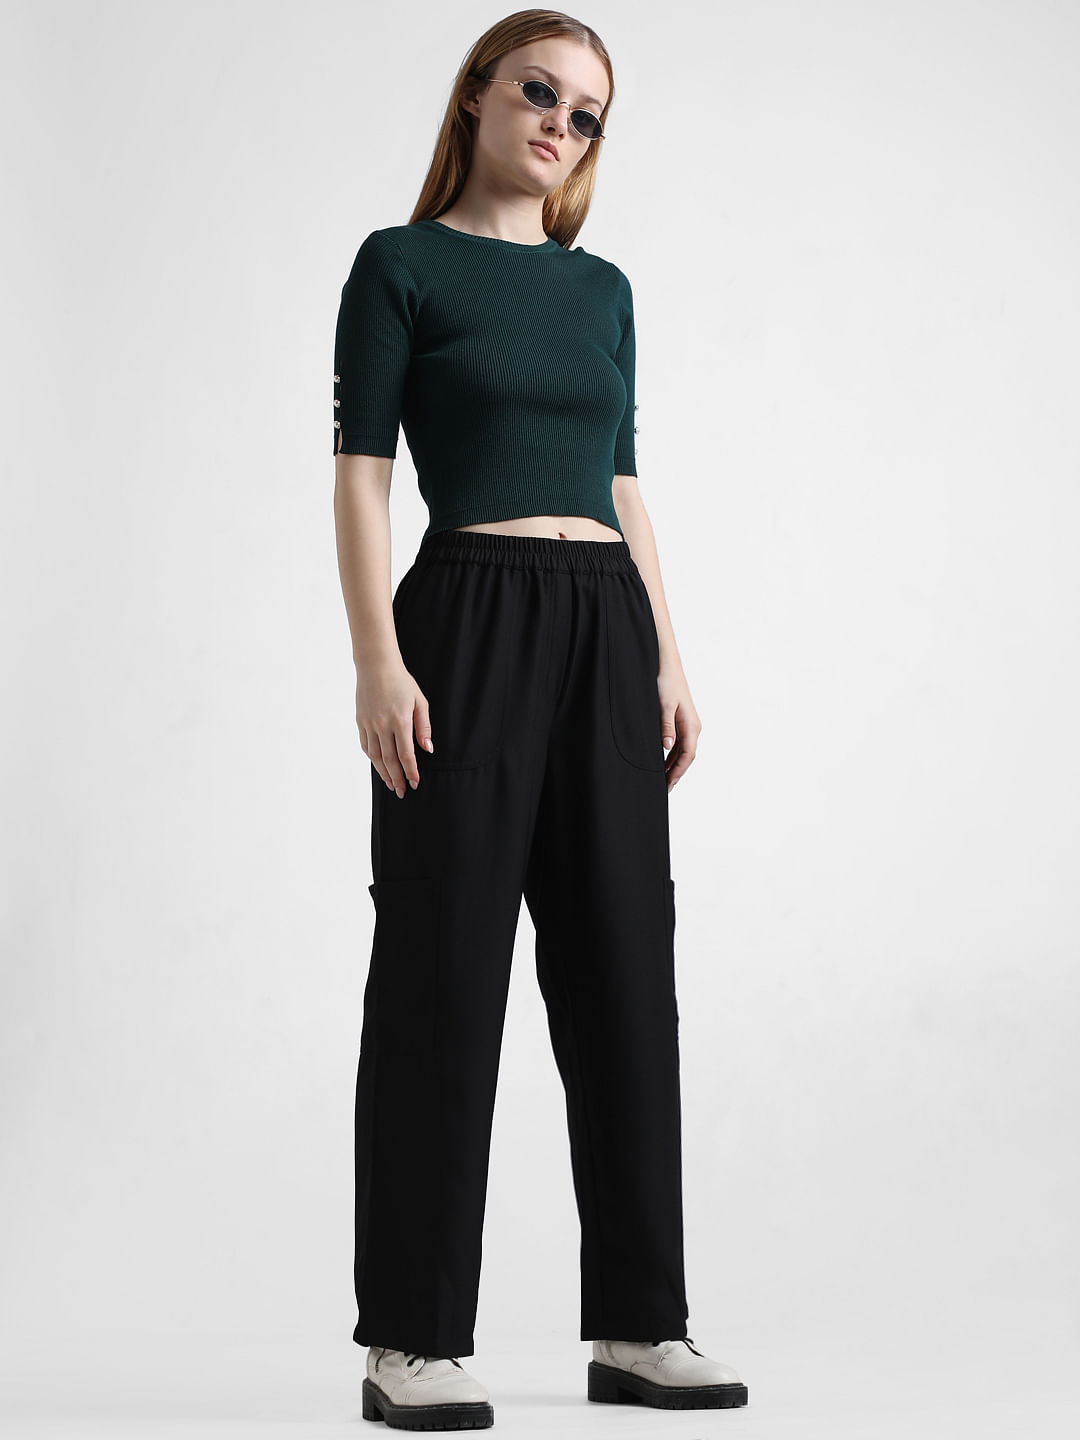 Buy Anthracite Black Trousers & Pants for Women by Vero Moda Online |  Ajio.com